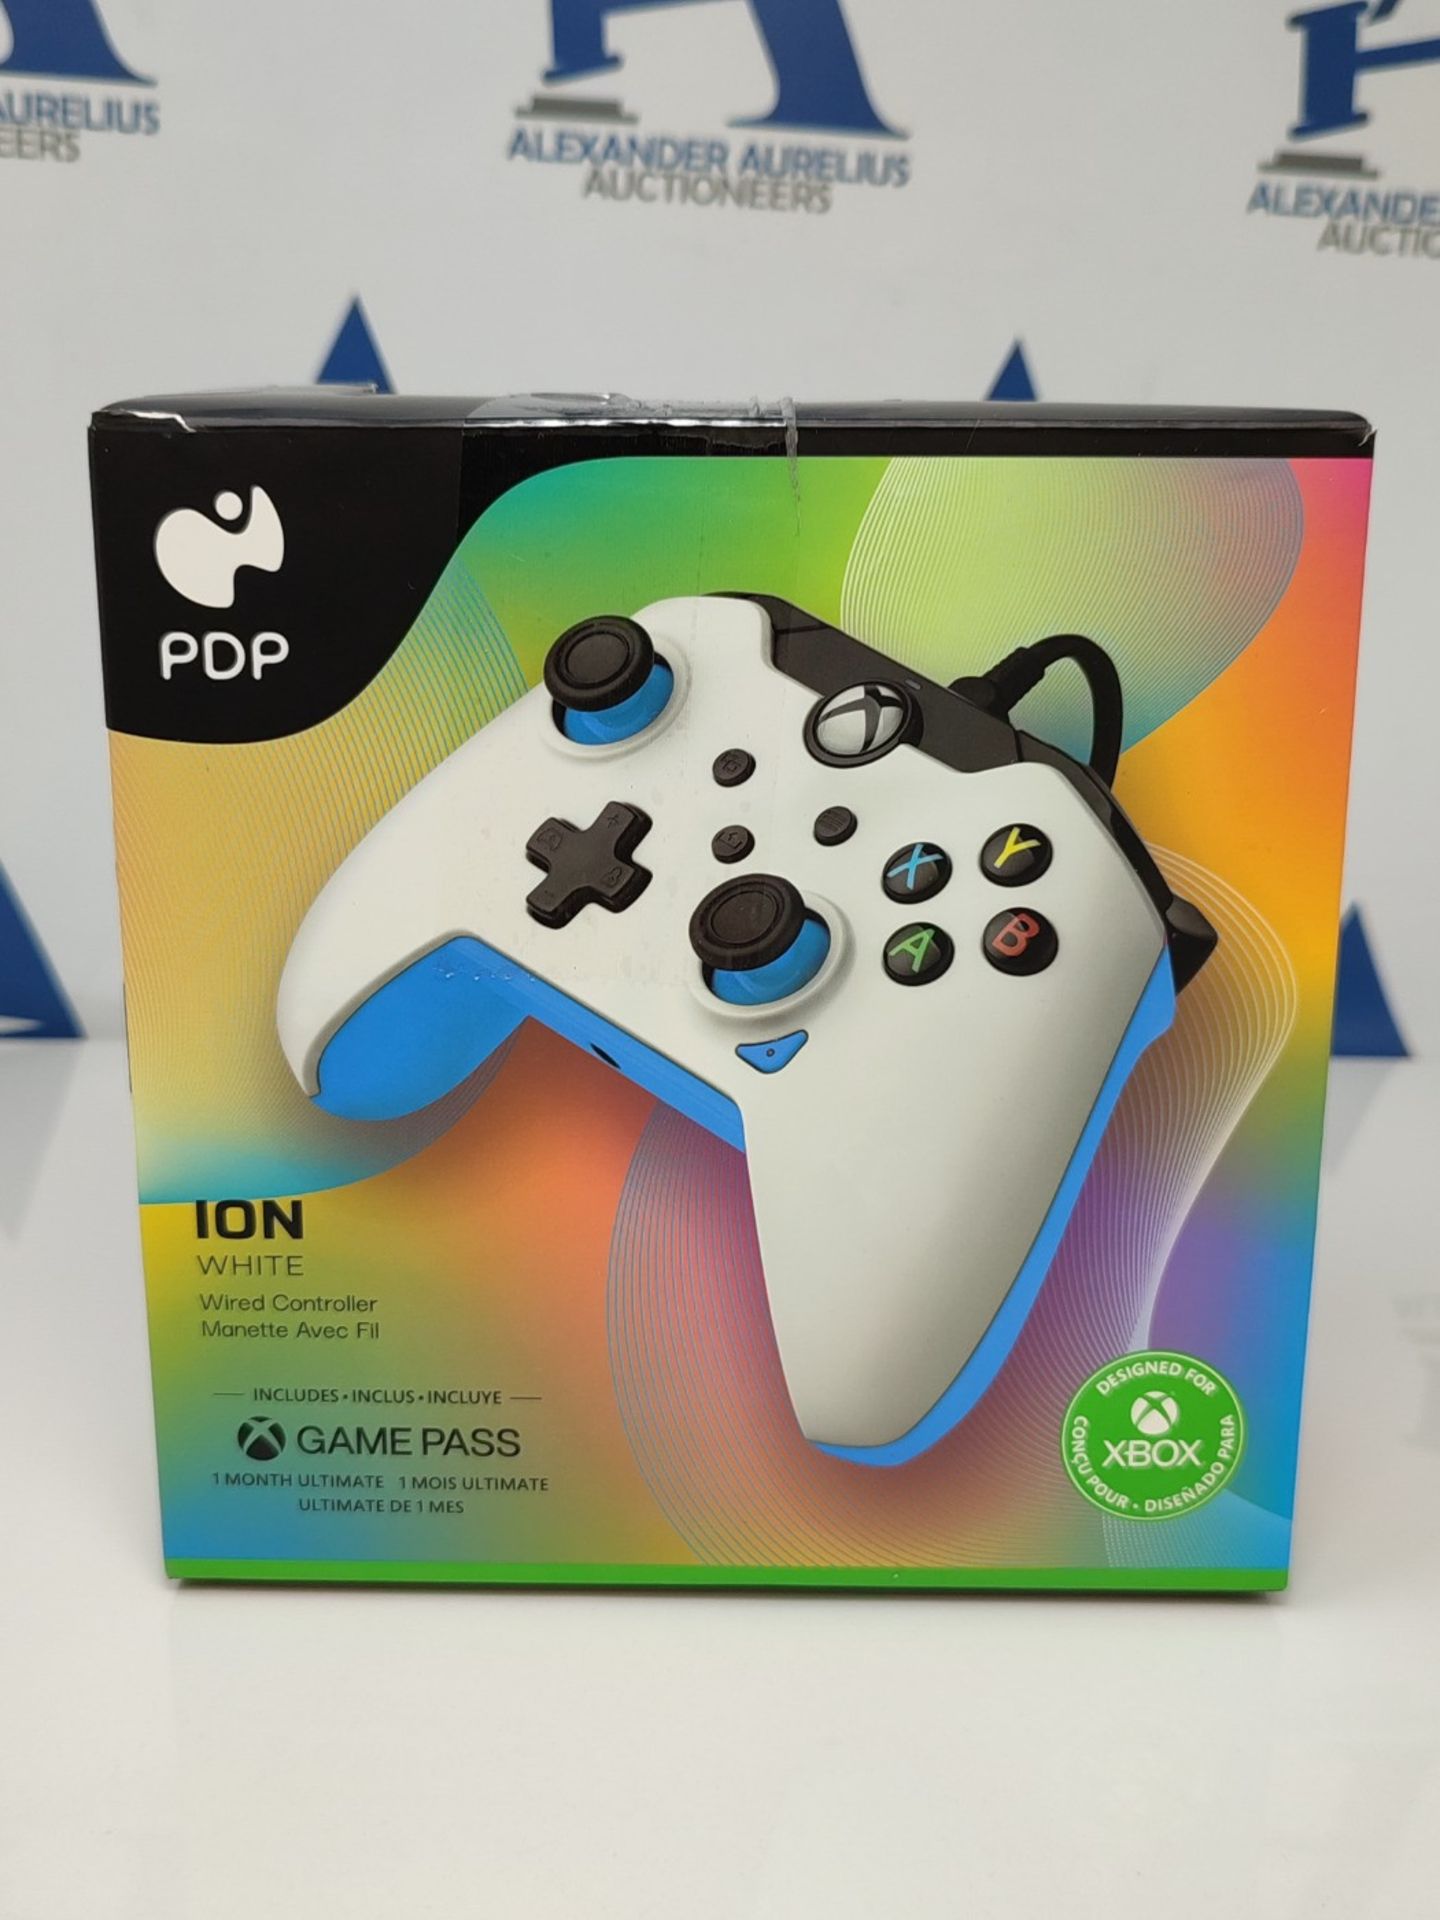 PDP Wired Controller Ion White for Xbox Series X and S, Gamepad, Wired Video Game Cont - Image 2 of 3